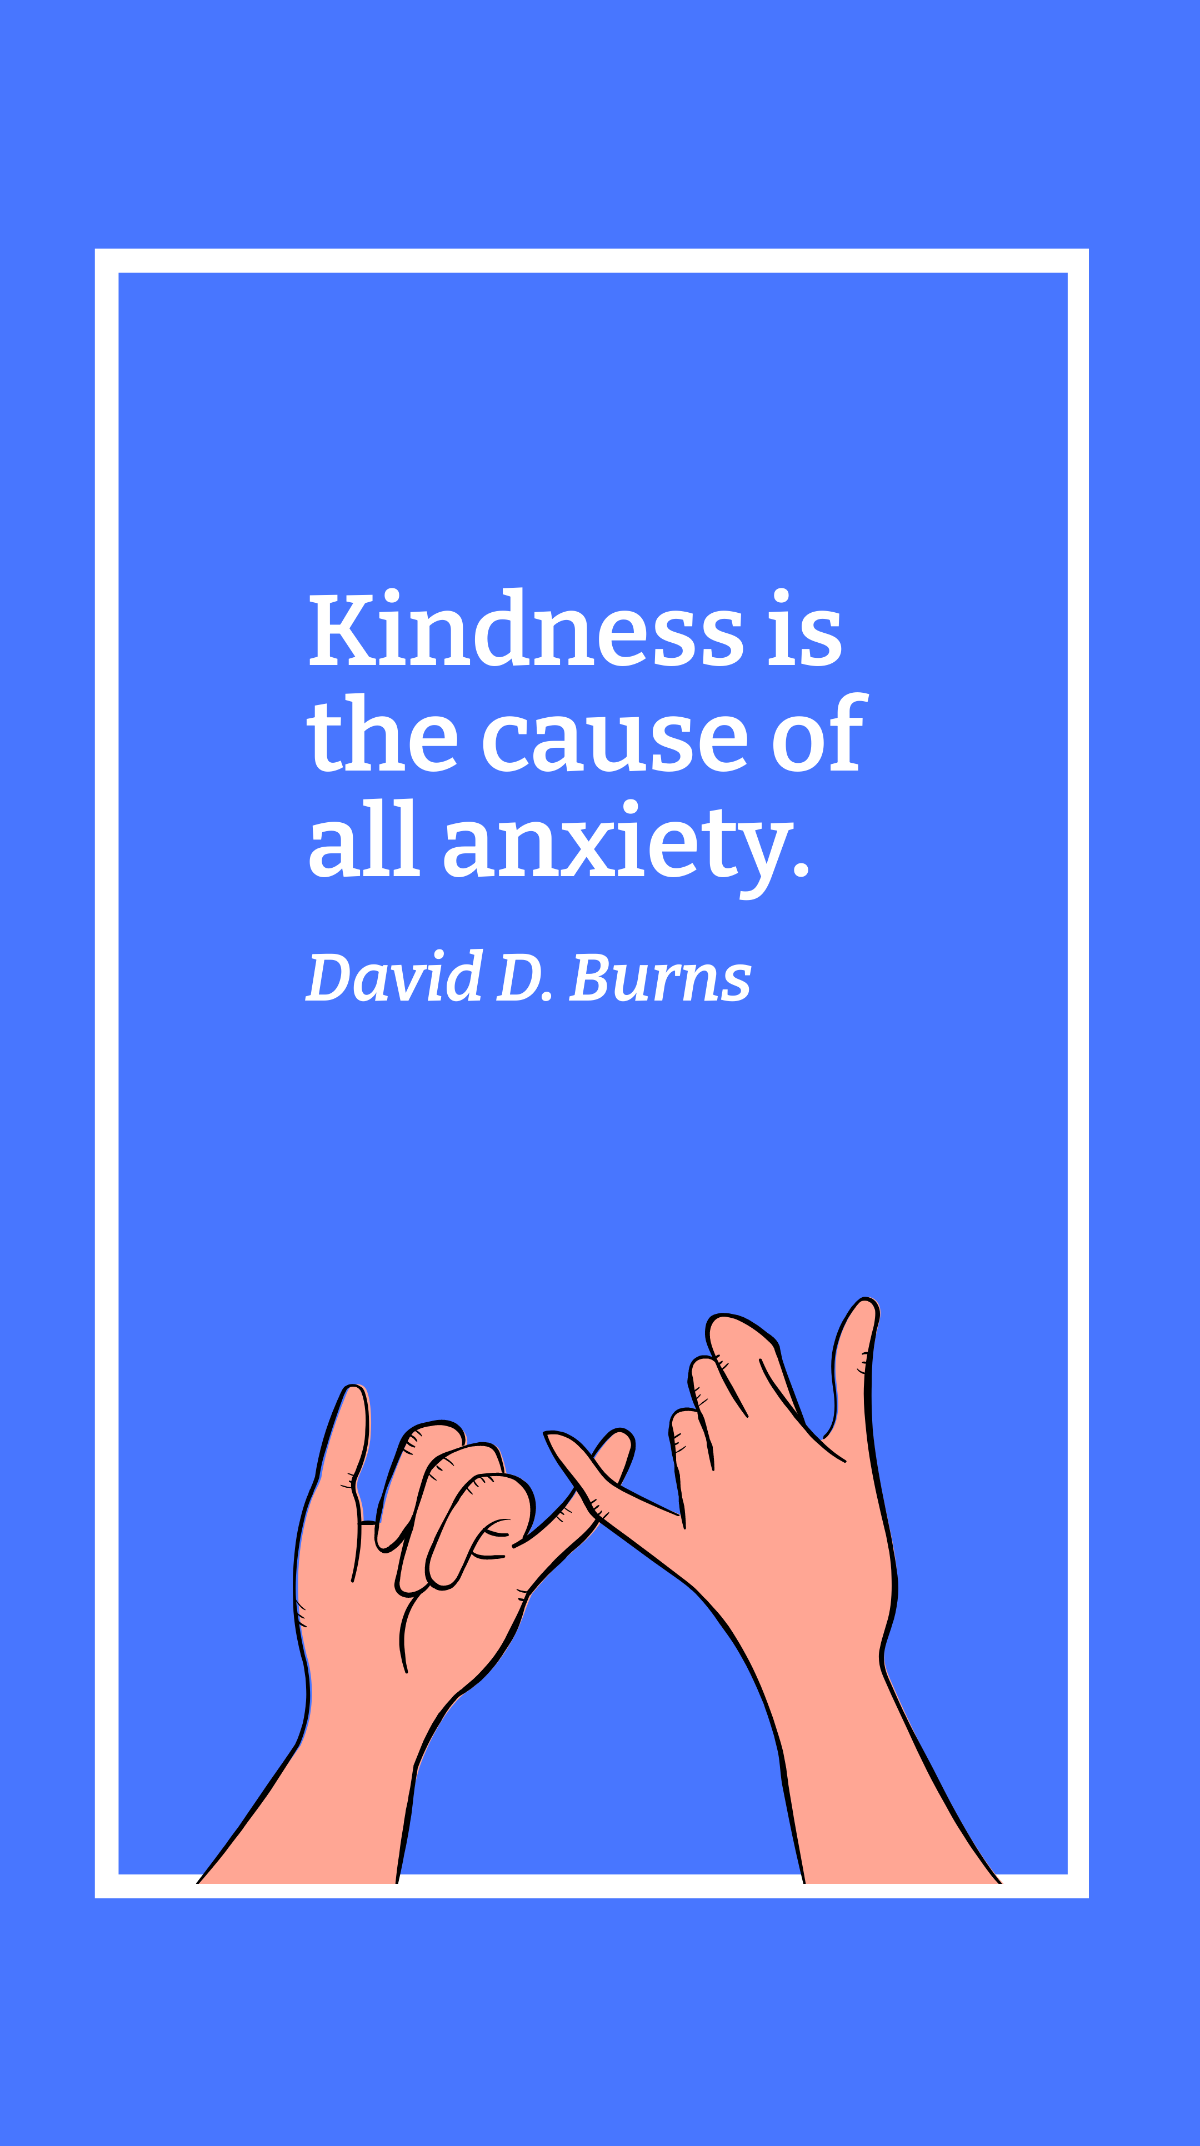 Free David D. Burns - Kindness is the cause of all anxiety. Template